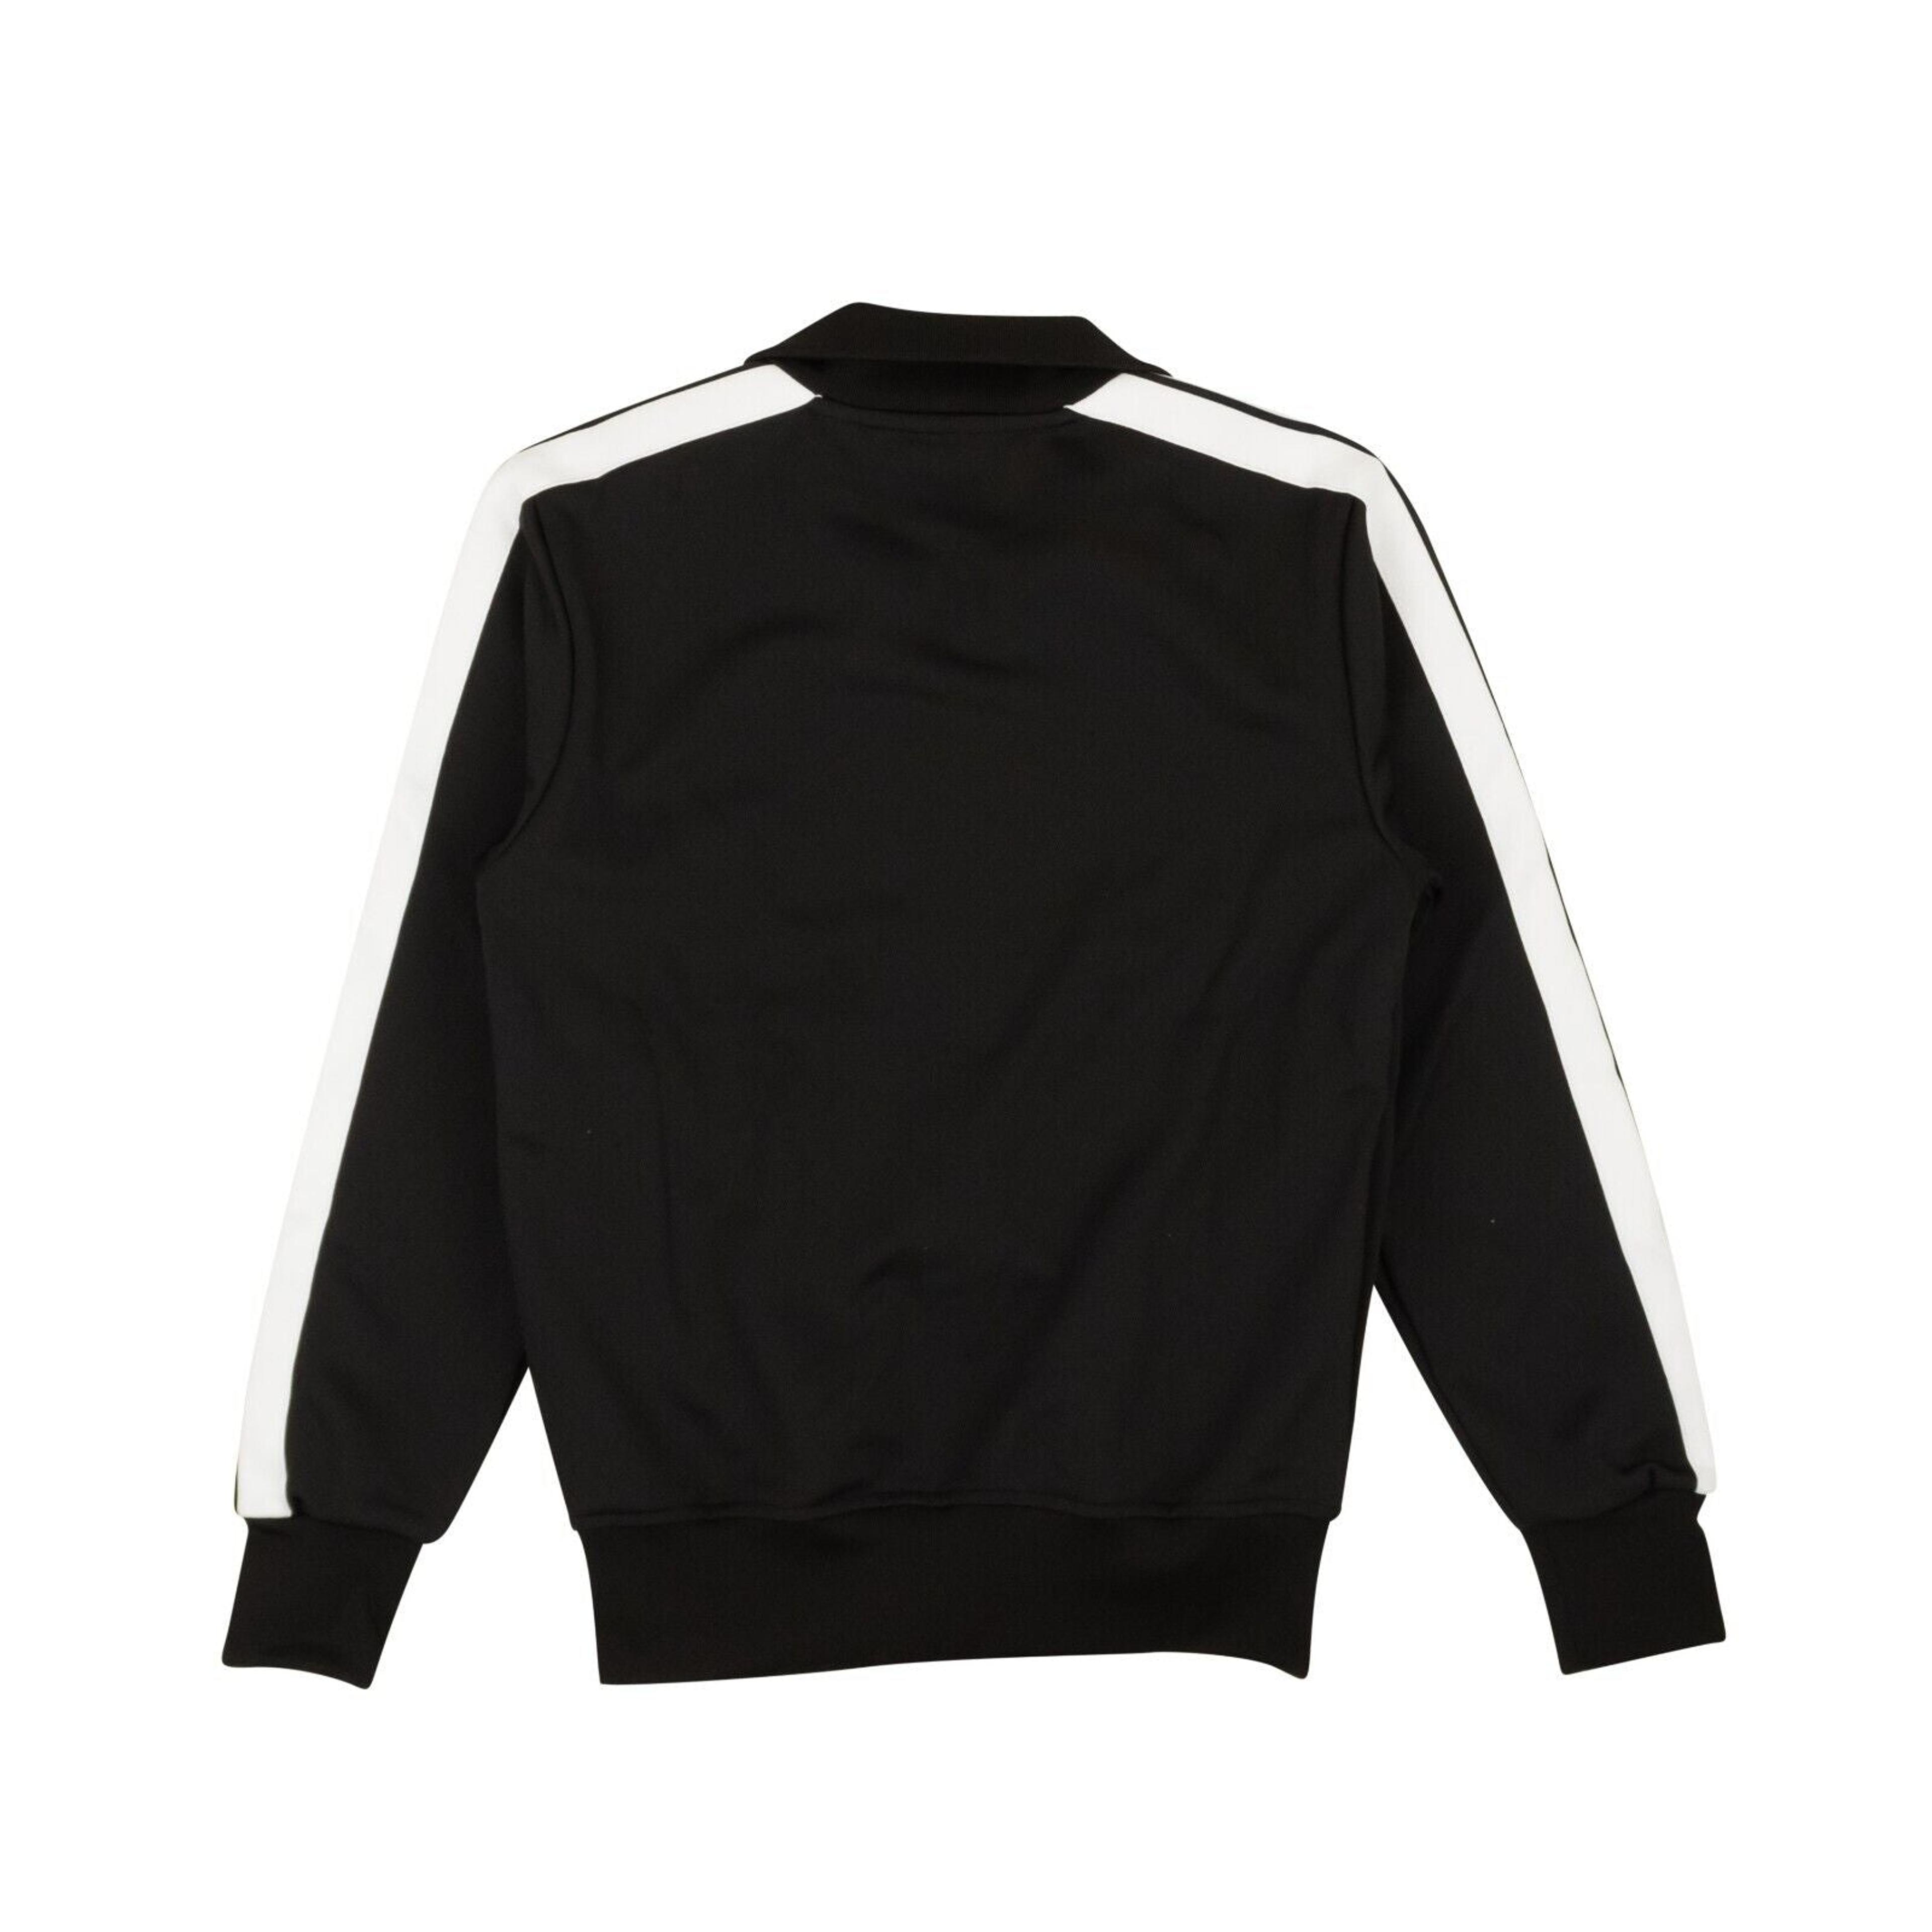 Alternate View 2 of Black Classic Polyester Side Stripe Track Jacket